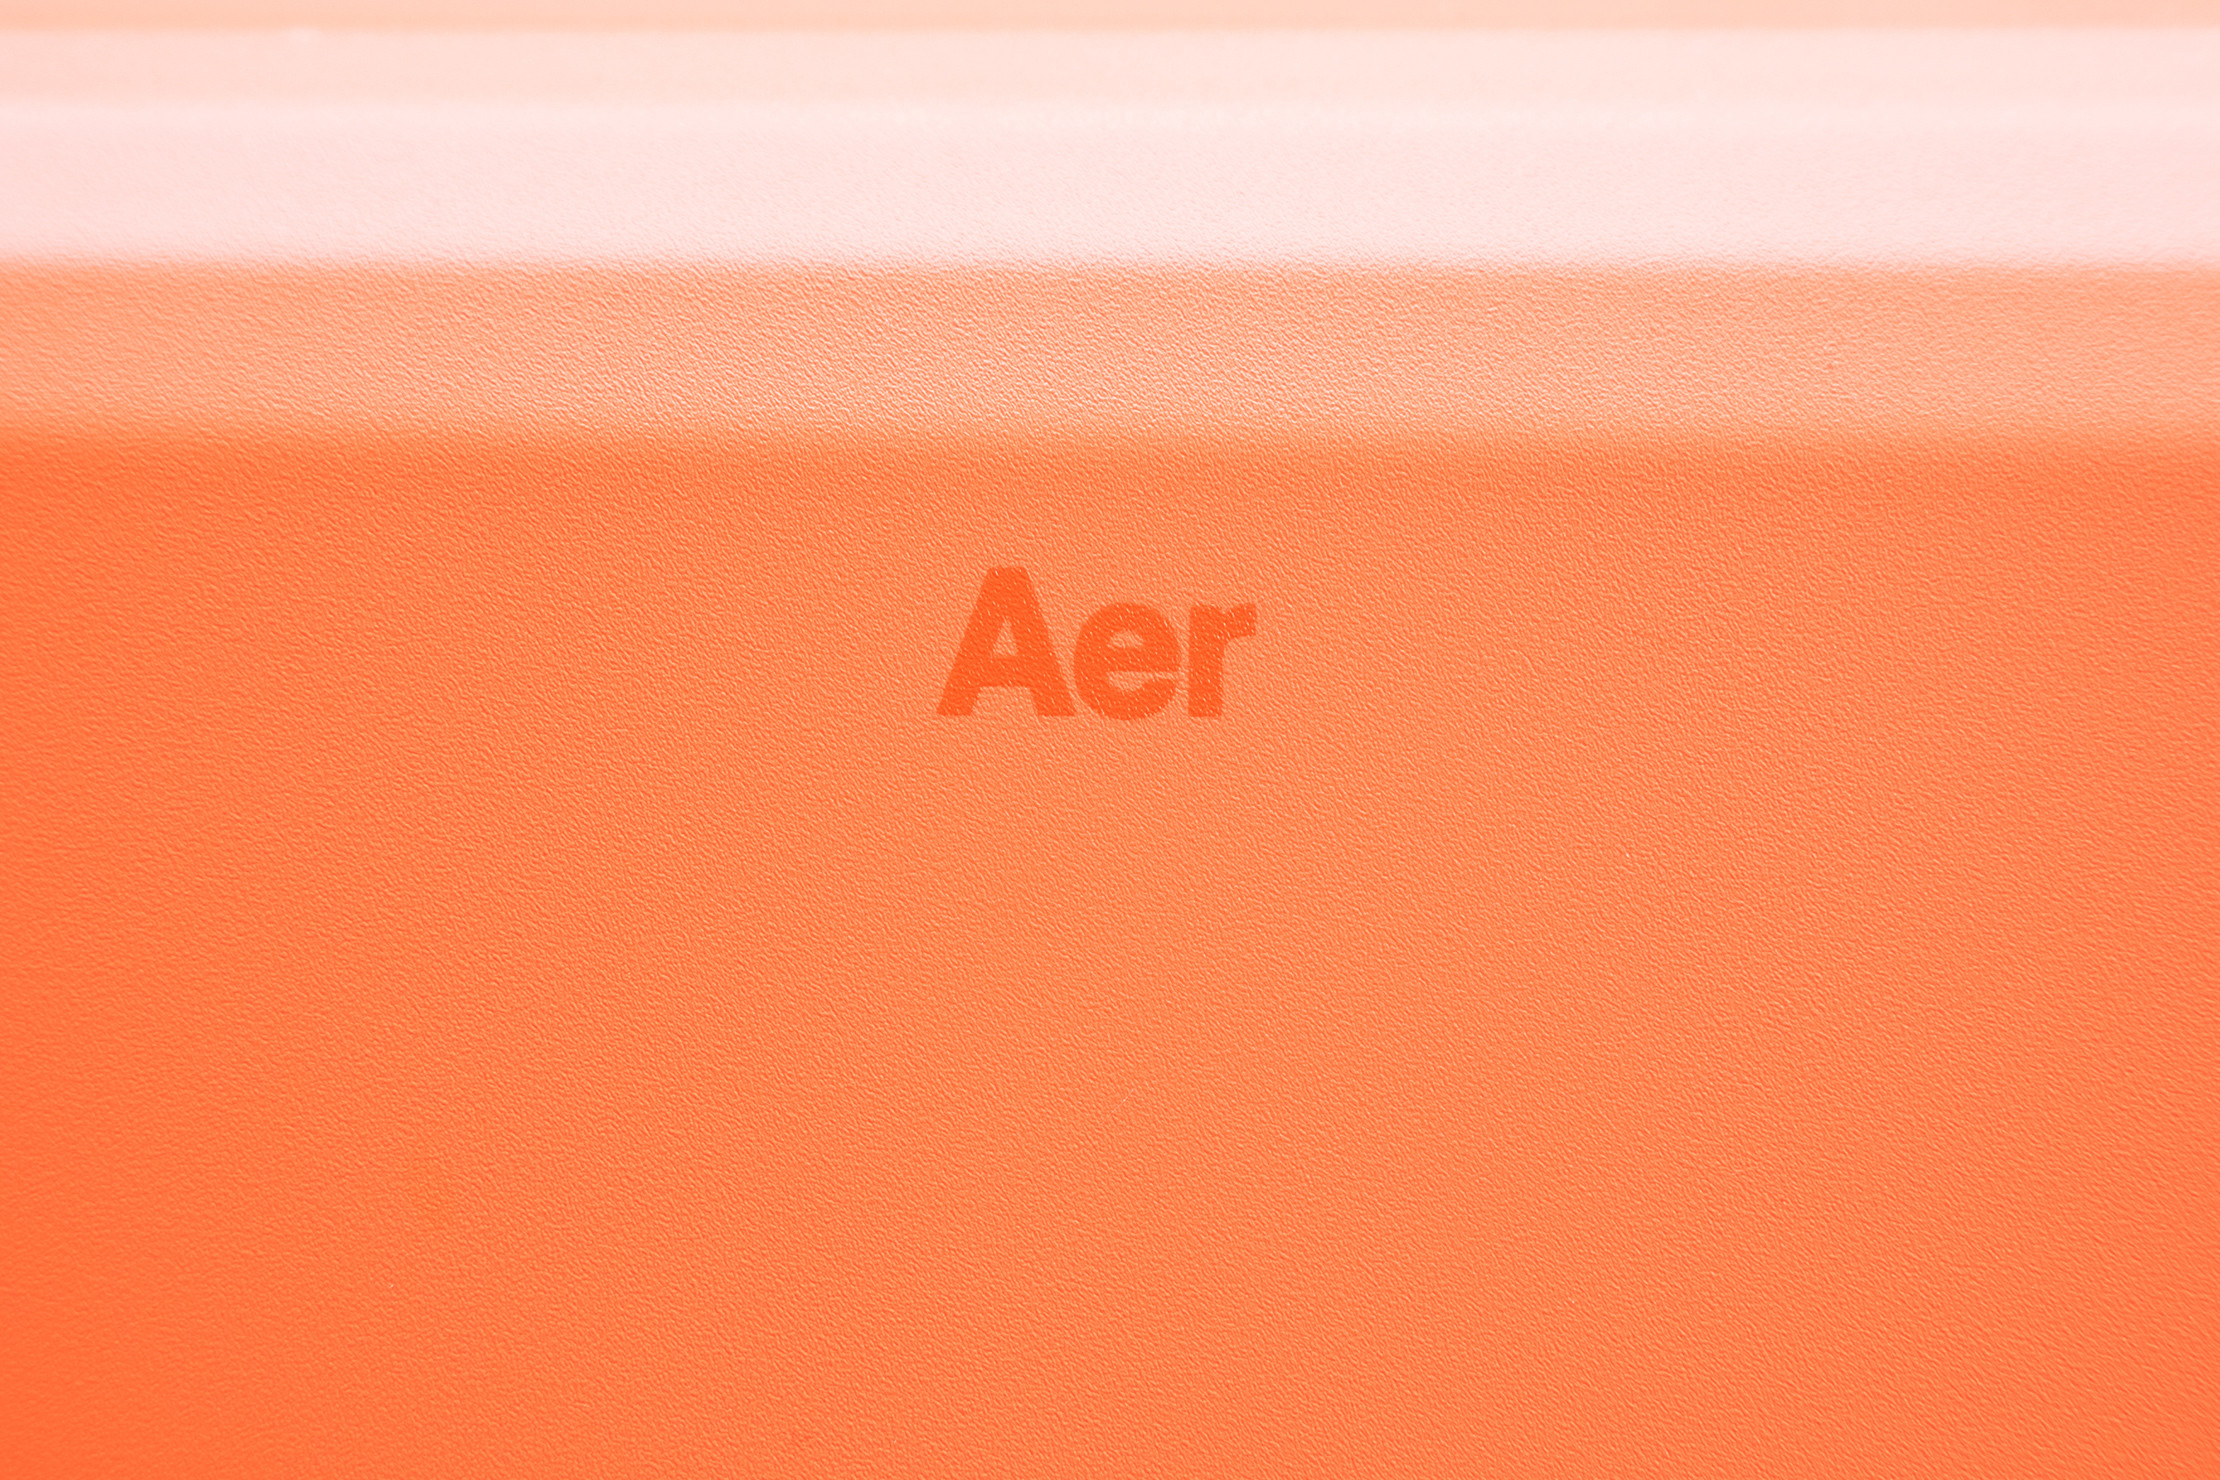 Aer Carry-On Brand